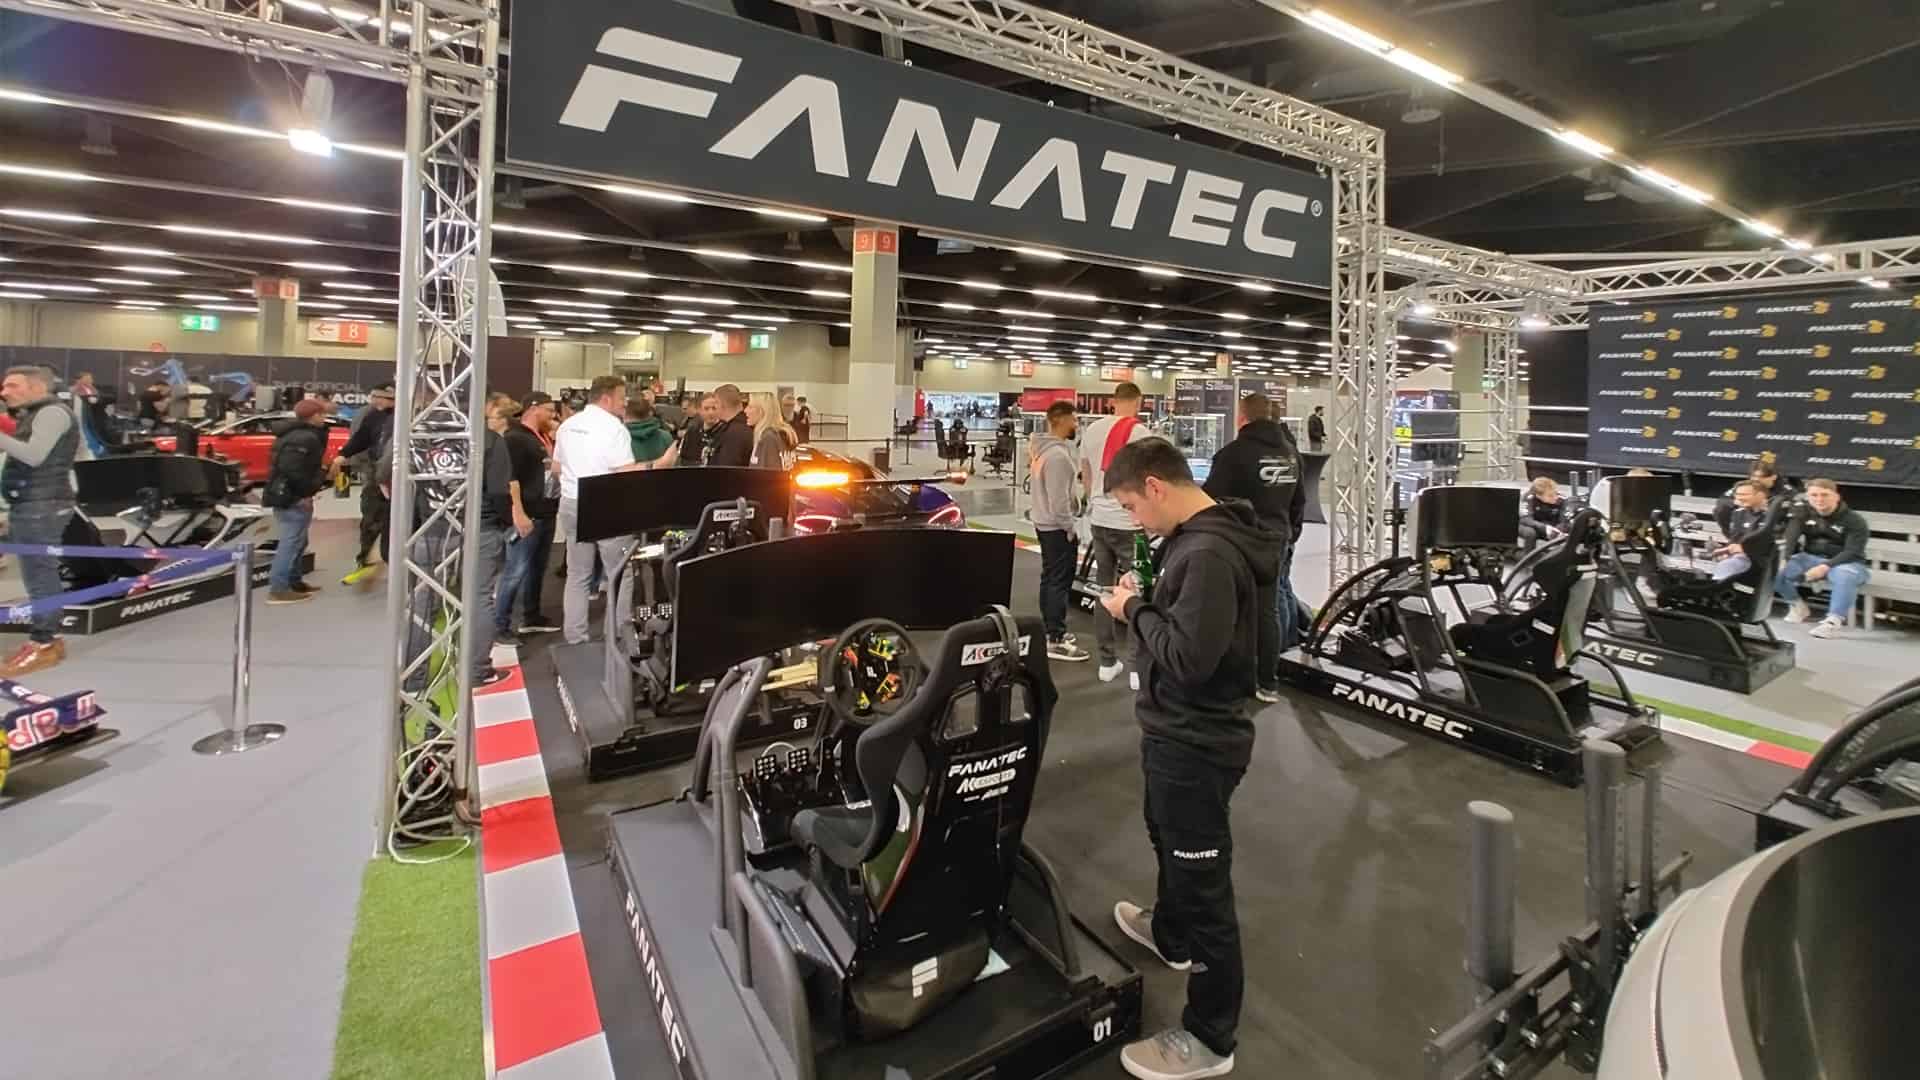 Fanatec - We spent the year developing replacement electronics for existing products 